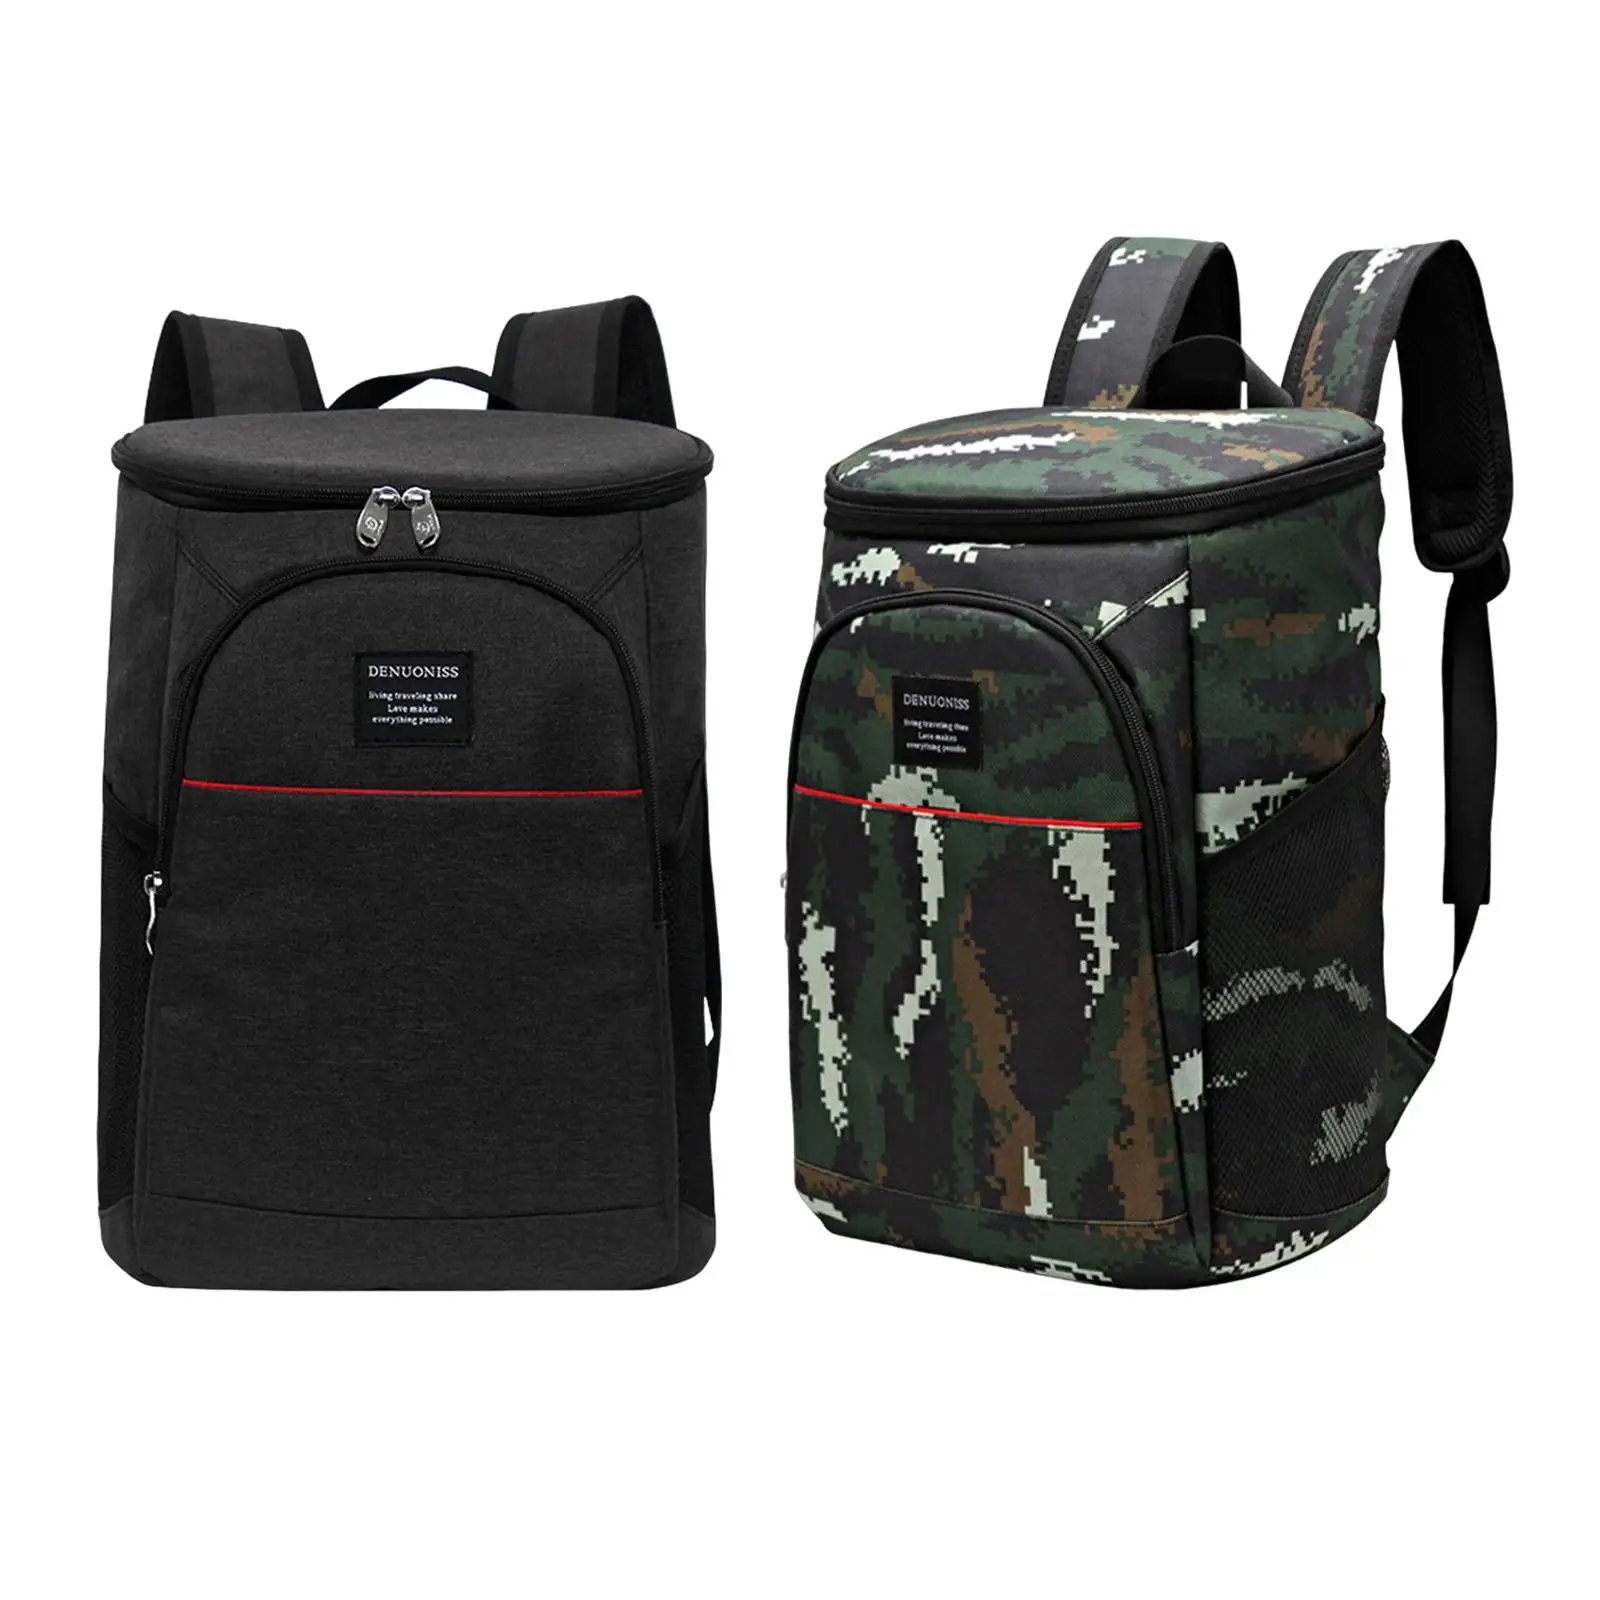 Backpack Cooler Waterproof Insulated Cooler Bag for Hiking Travel Picnic